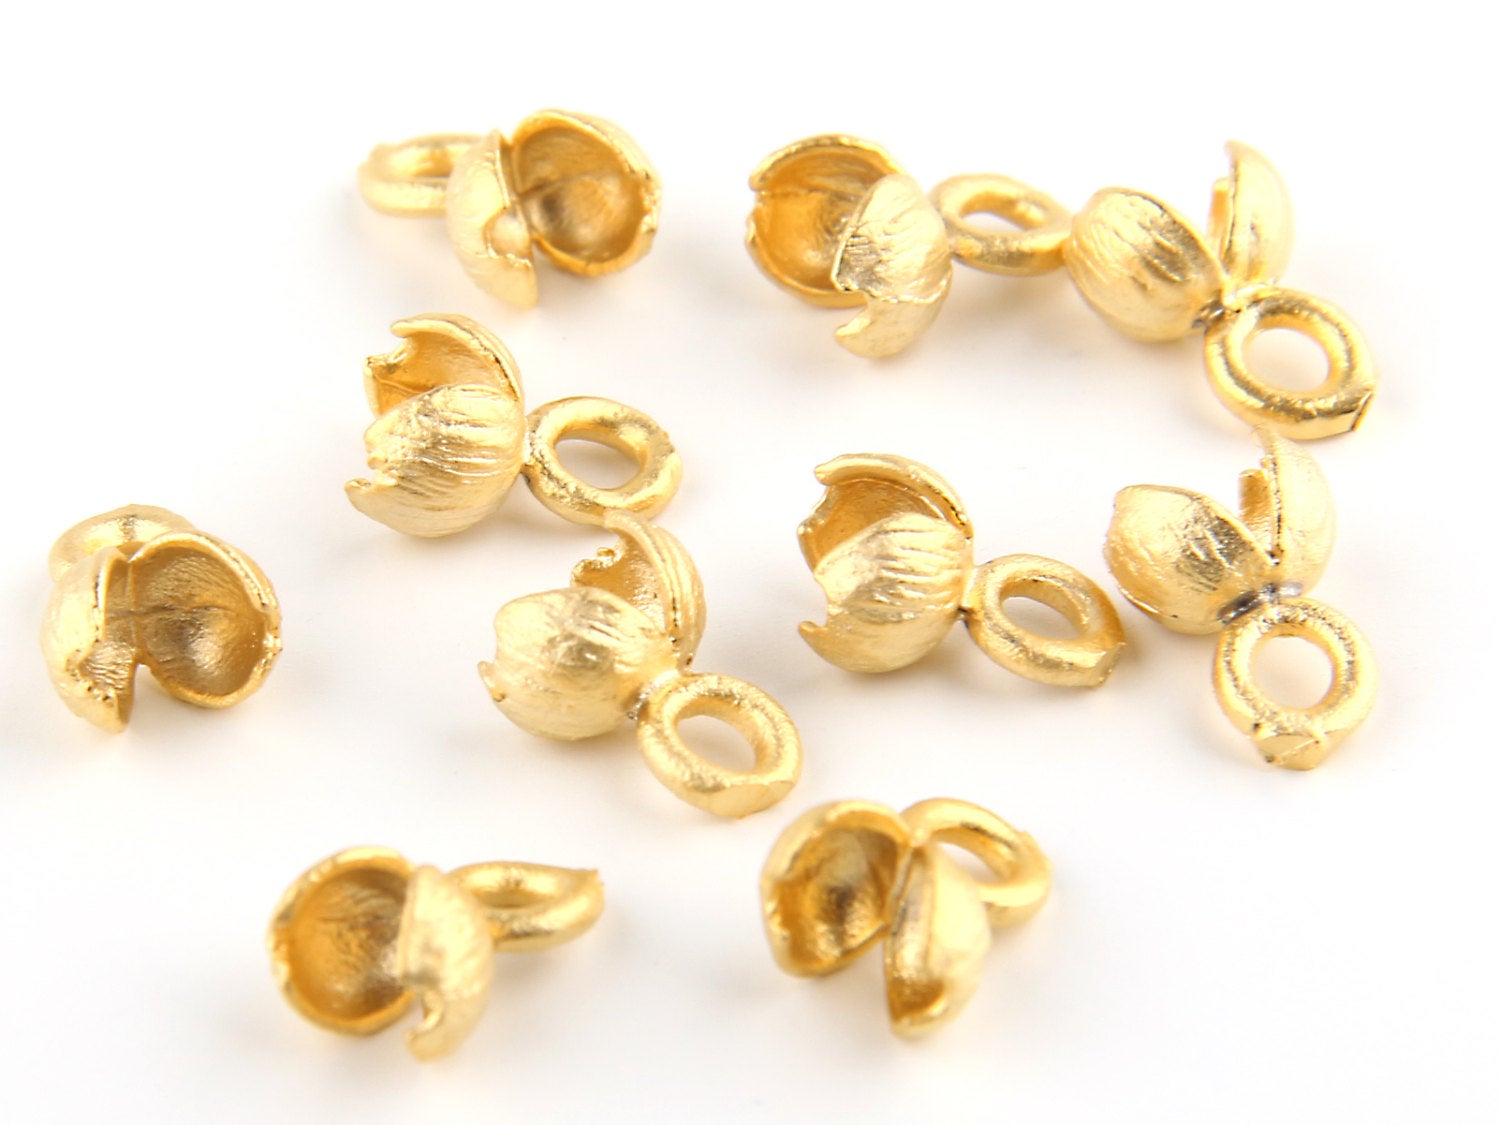 Gold Plated End Caps, Knot Cover Ends, 22k Matte GoldPlated, 10 pieces // GF-107